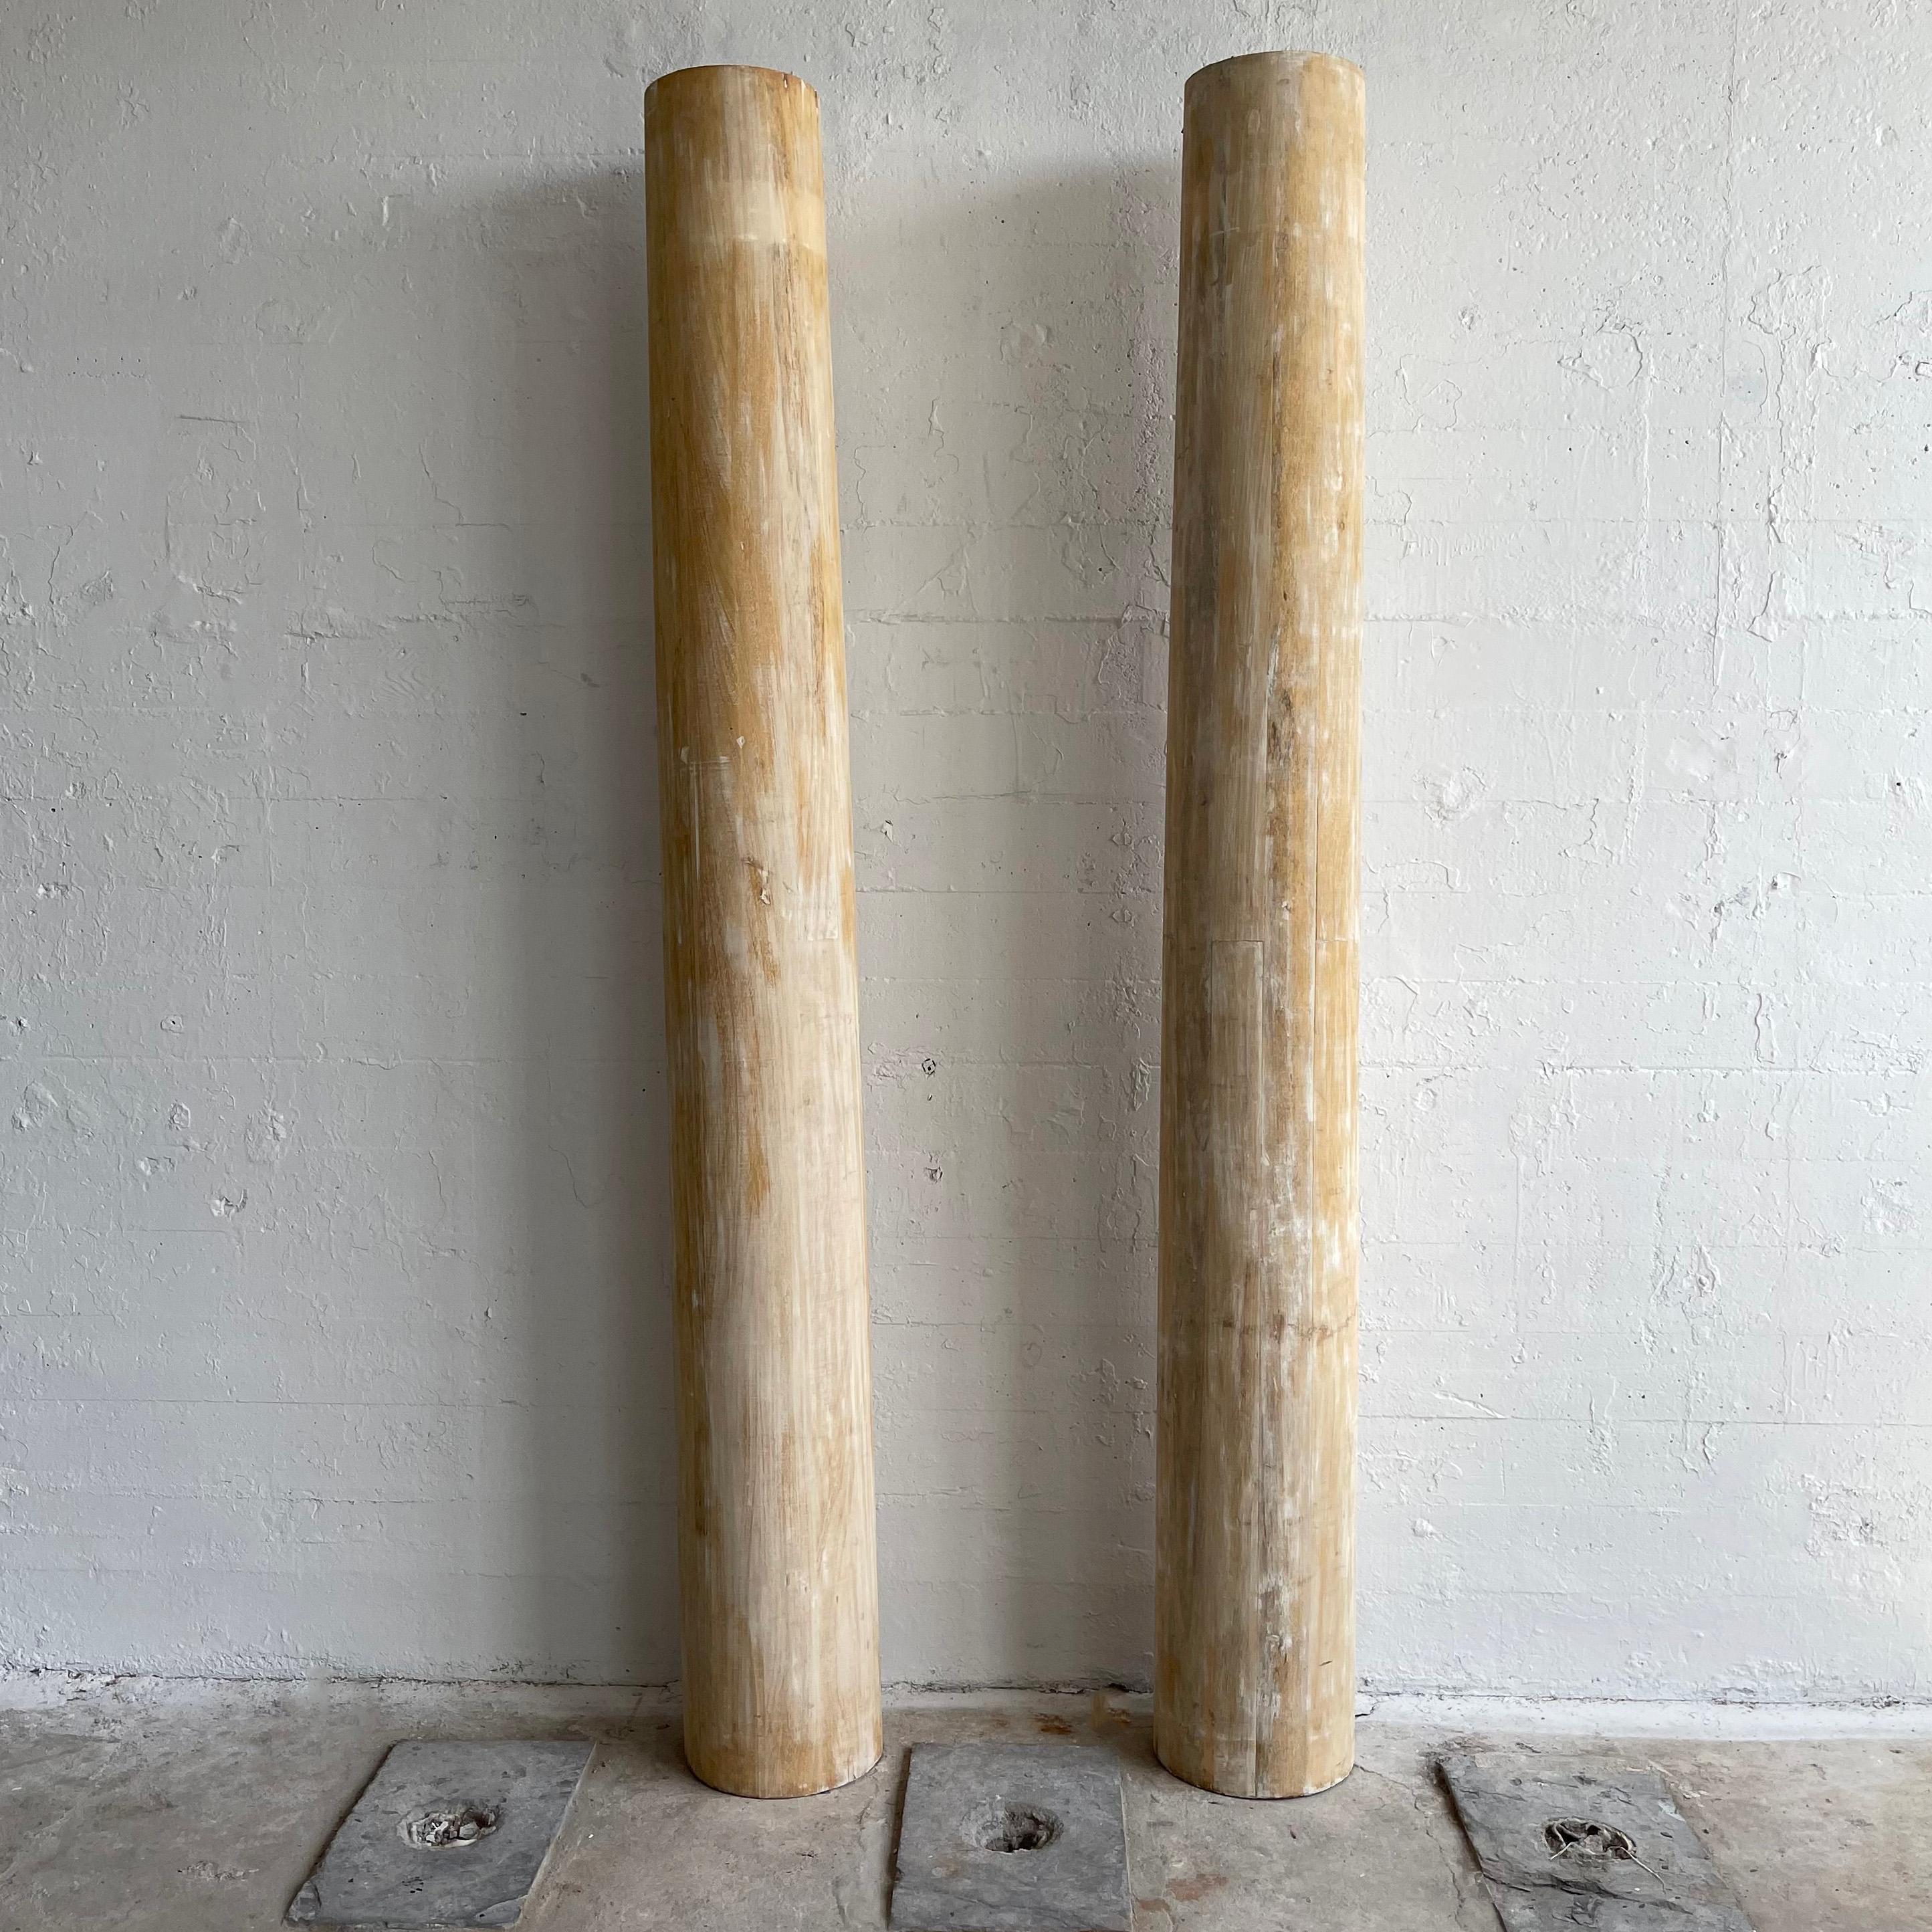 Pair of majestic, architectural columns stand slightly over 8ft tall. The columns are made of hollow poplar and  feature a wonderful, rustic, bark-like patina. They are architectural but not structural.